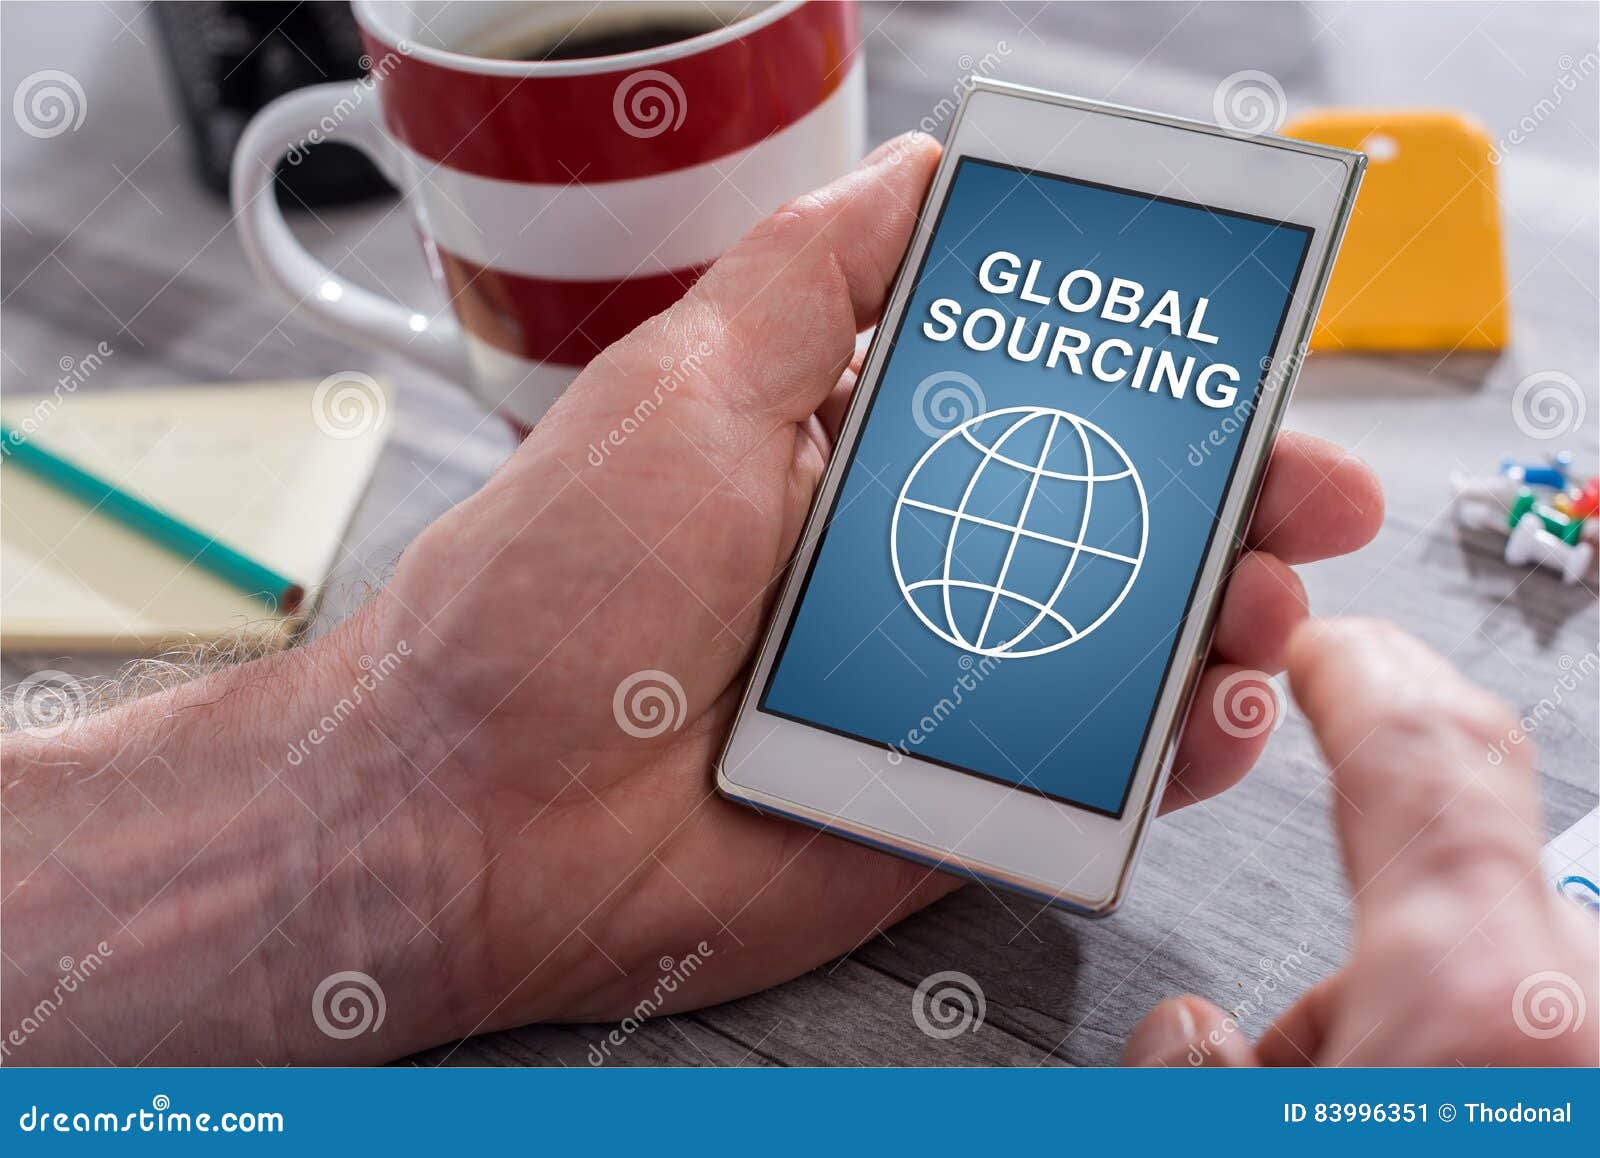 Global Sourcing Concept On A Smartphone Stock Image ...